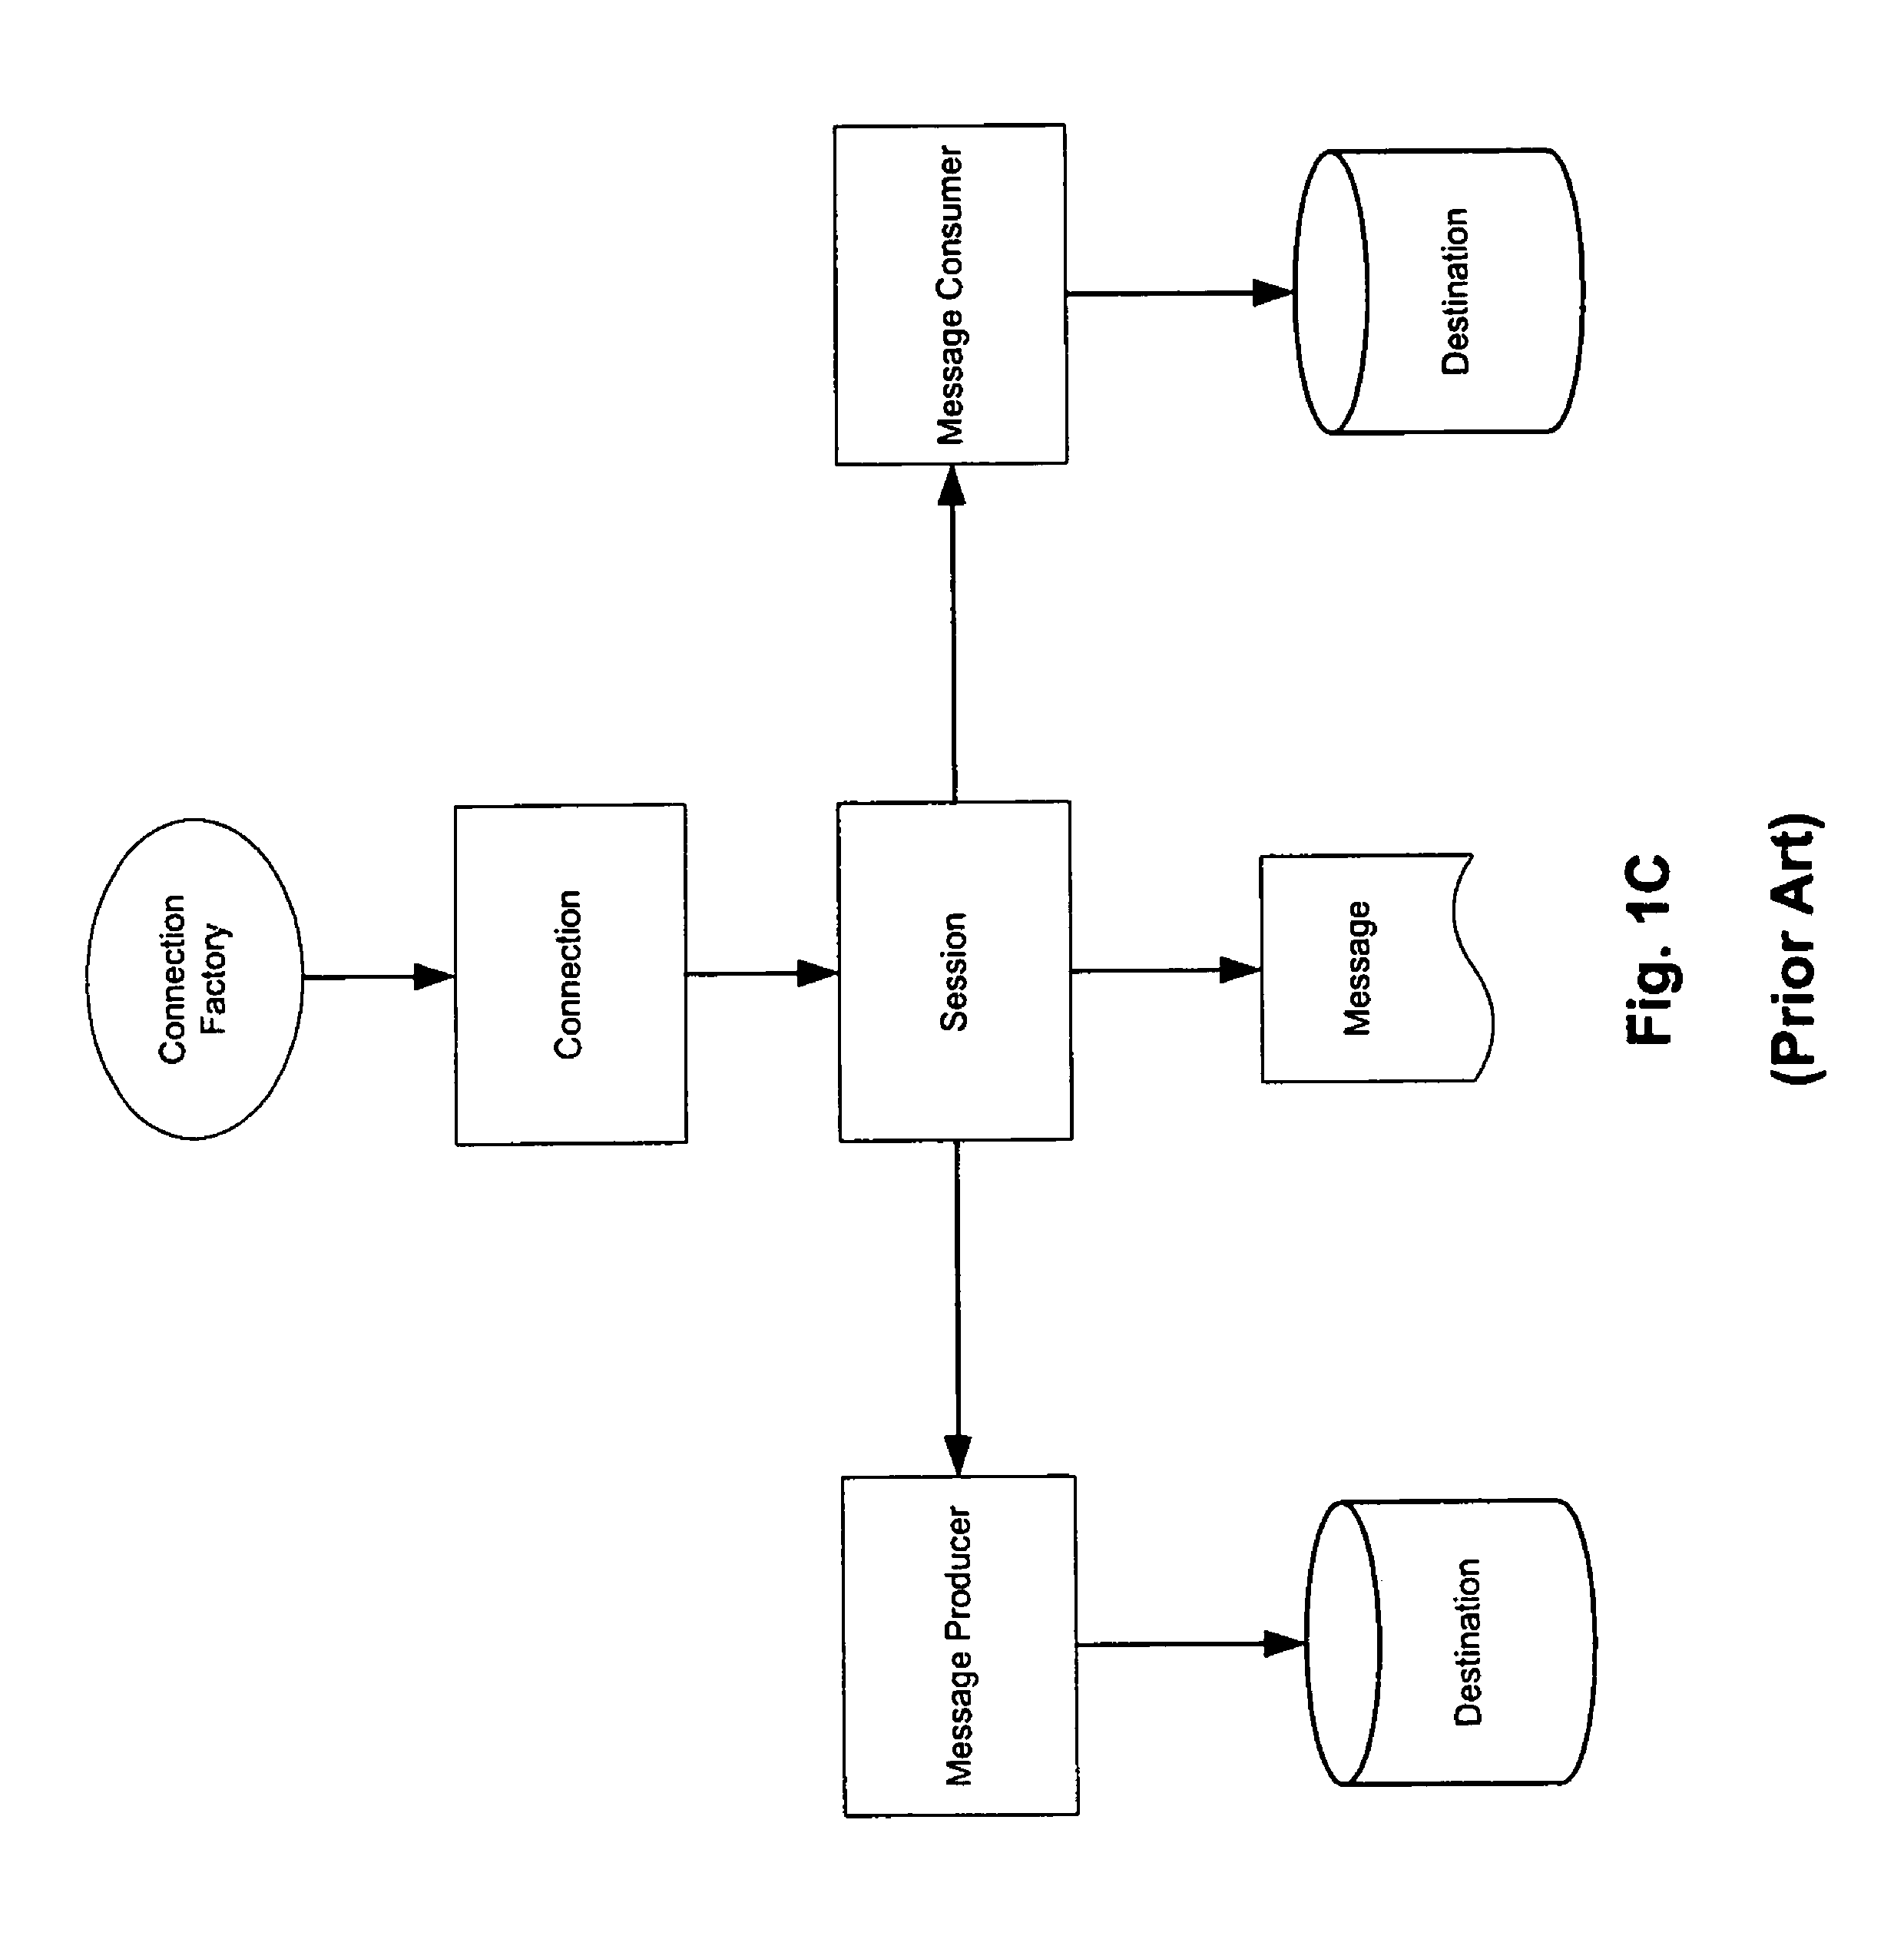 Methods and apparatus for subscribing/publishing messages in an enterprising computing environment